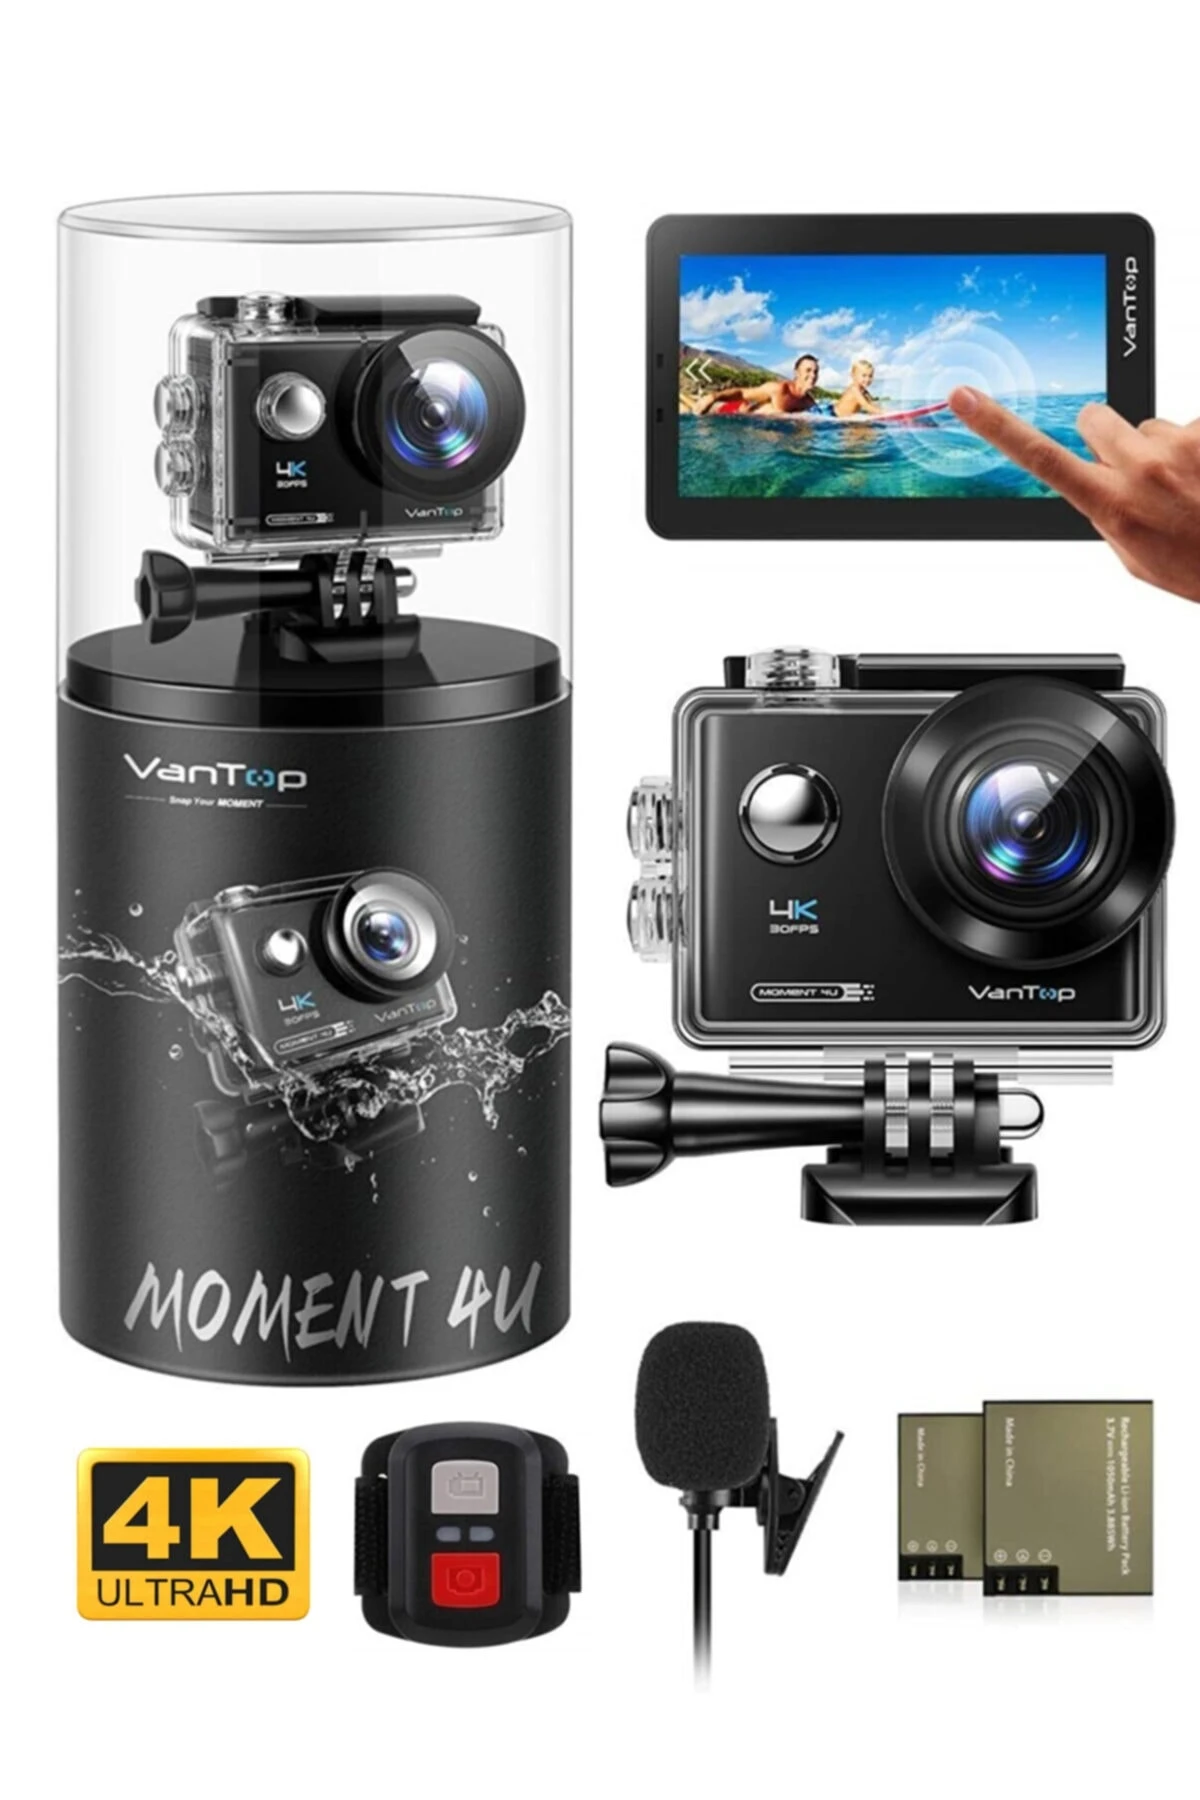 action camera brands VanTop Moment 4u 4k Action Camera 20mp Waterproof + Dual Battery + 170° Wide Angle + EIS Image St best action camera